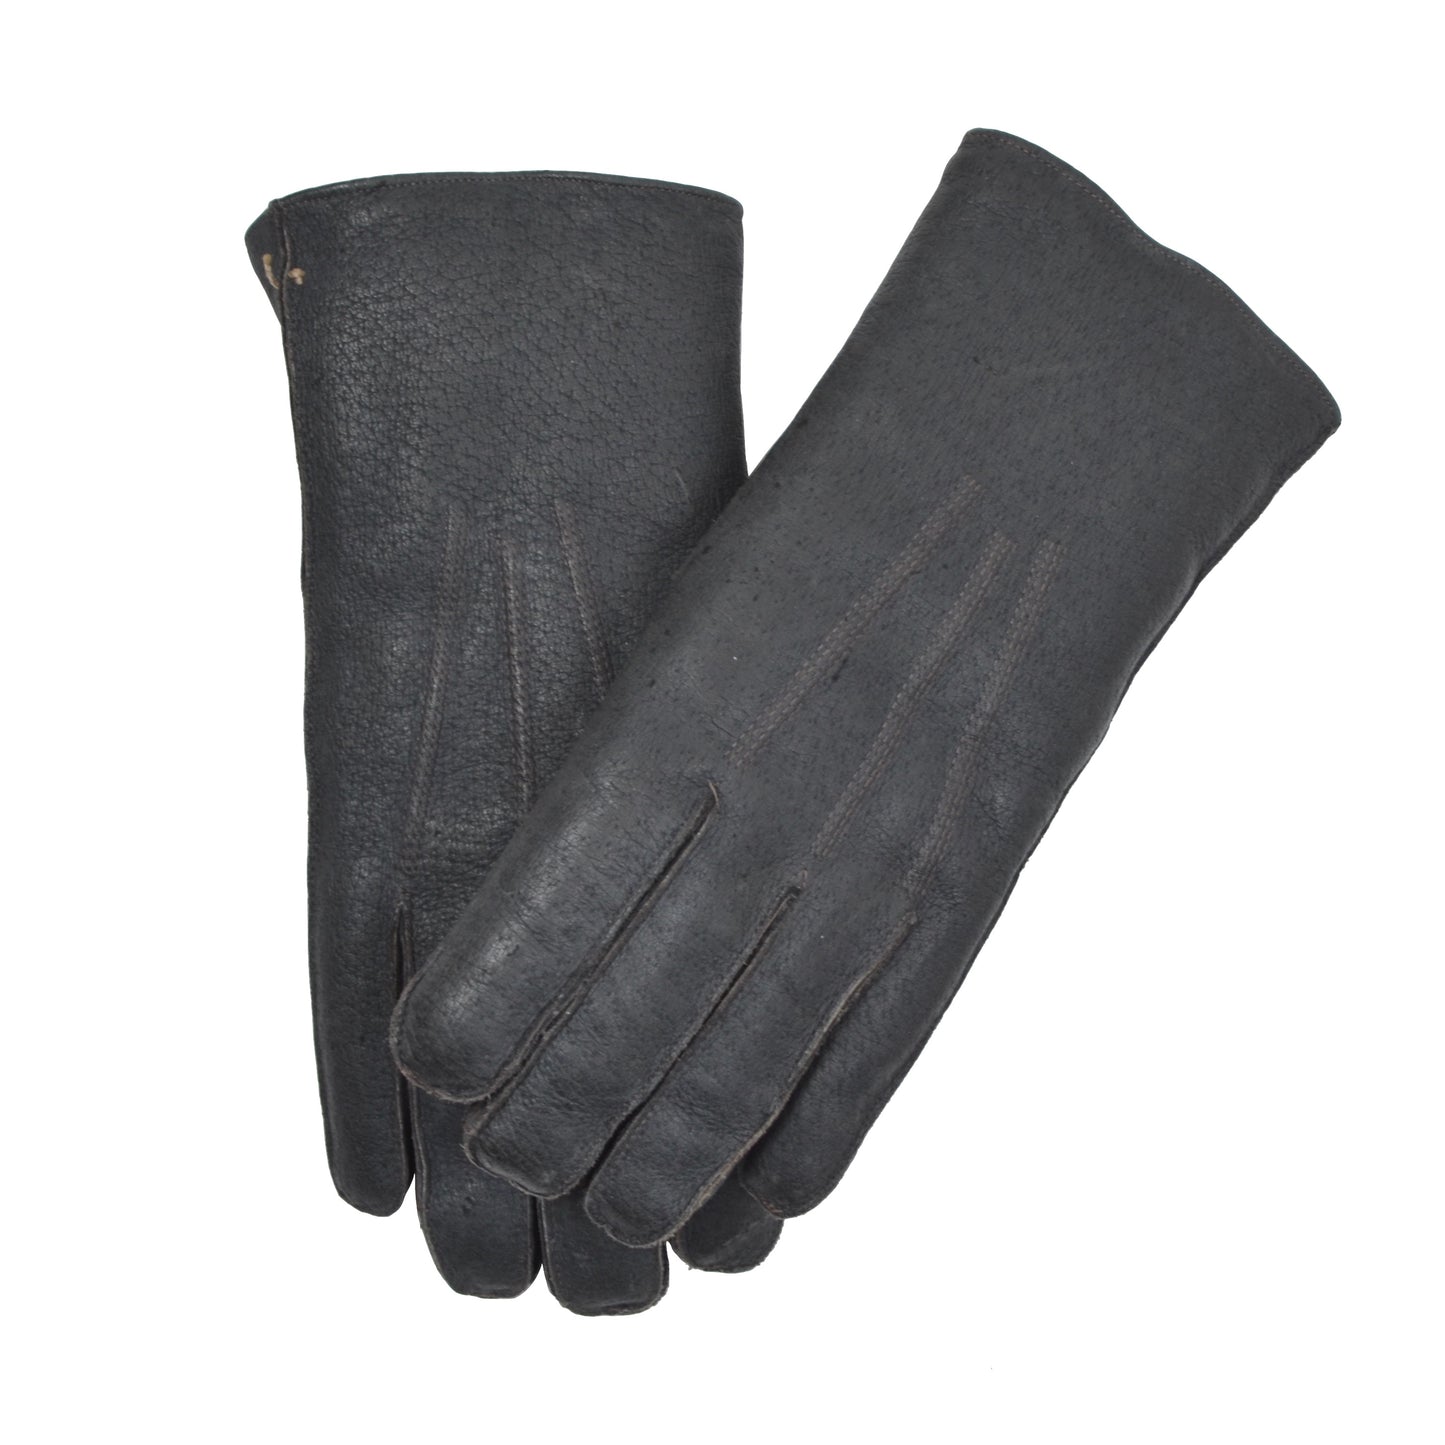 Shearling-Lined Leather Gloves Size 8.5 - Charcoal/Black